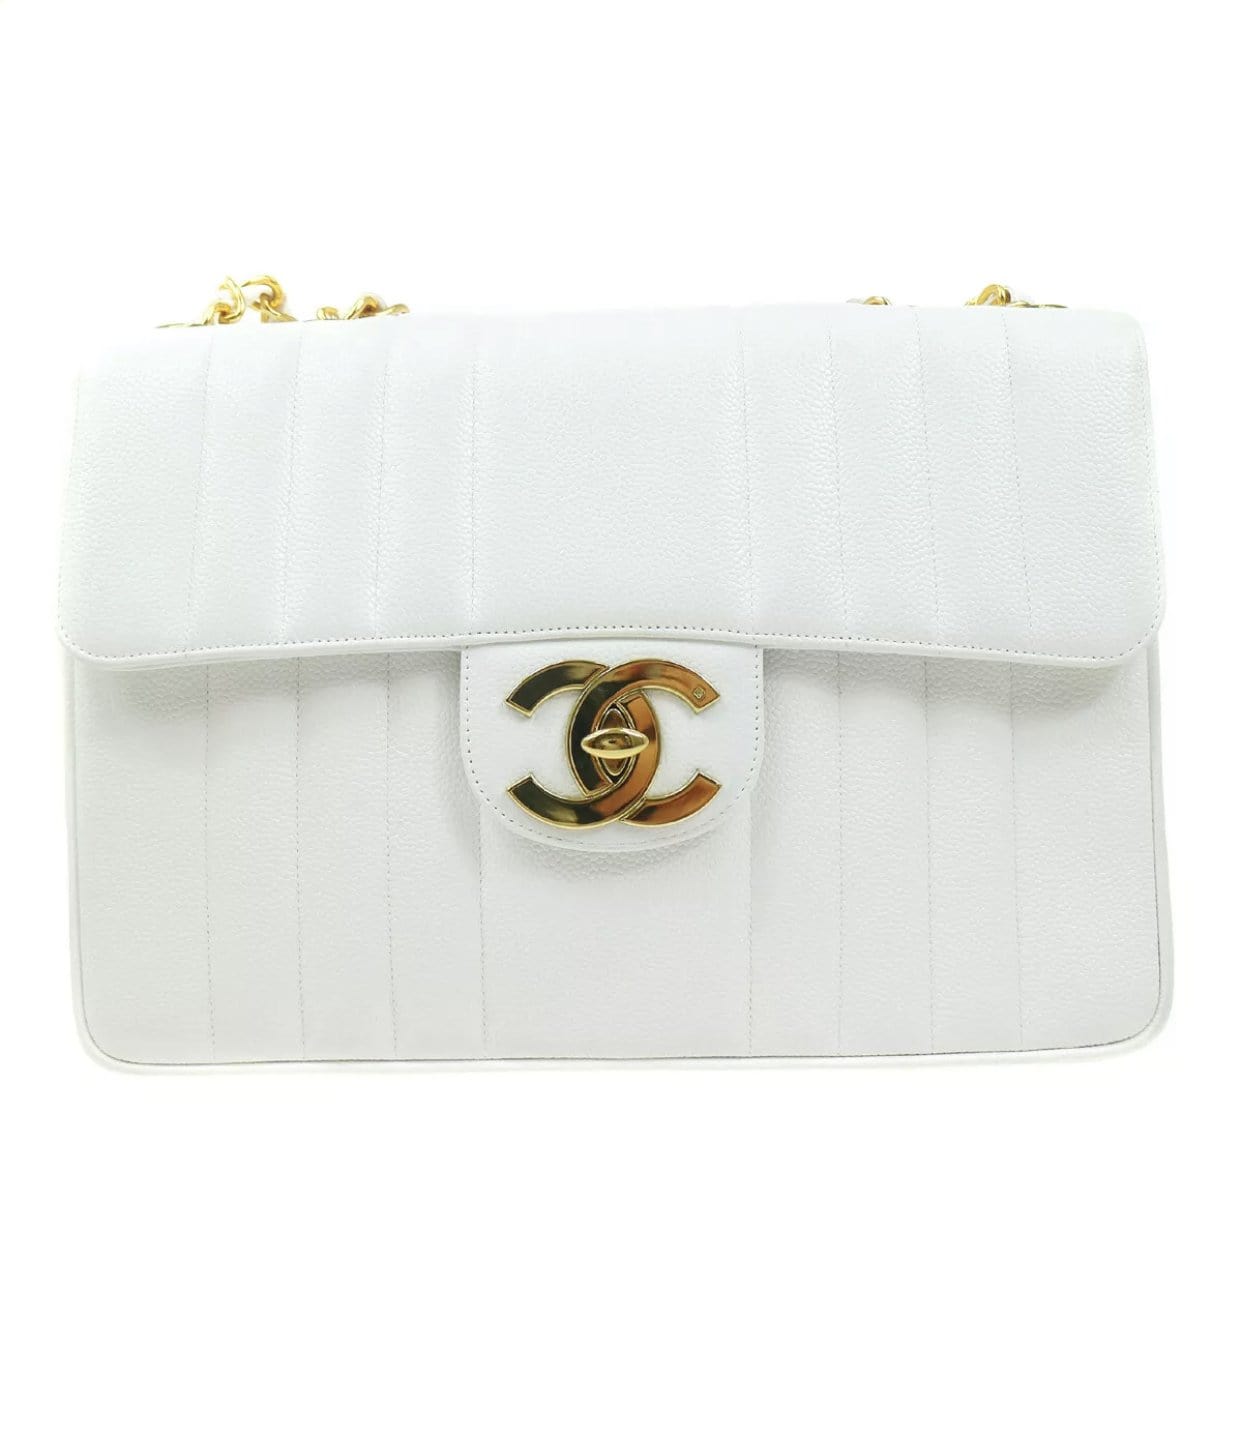 Chanel Classic Small Double Flap, White Caviar Leather with Light